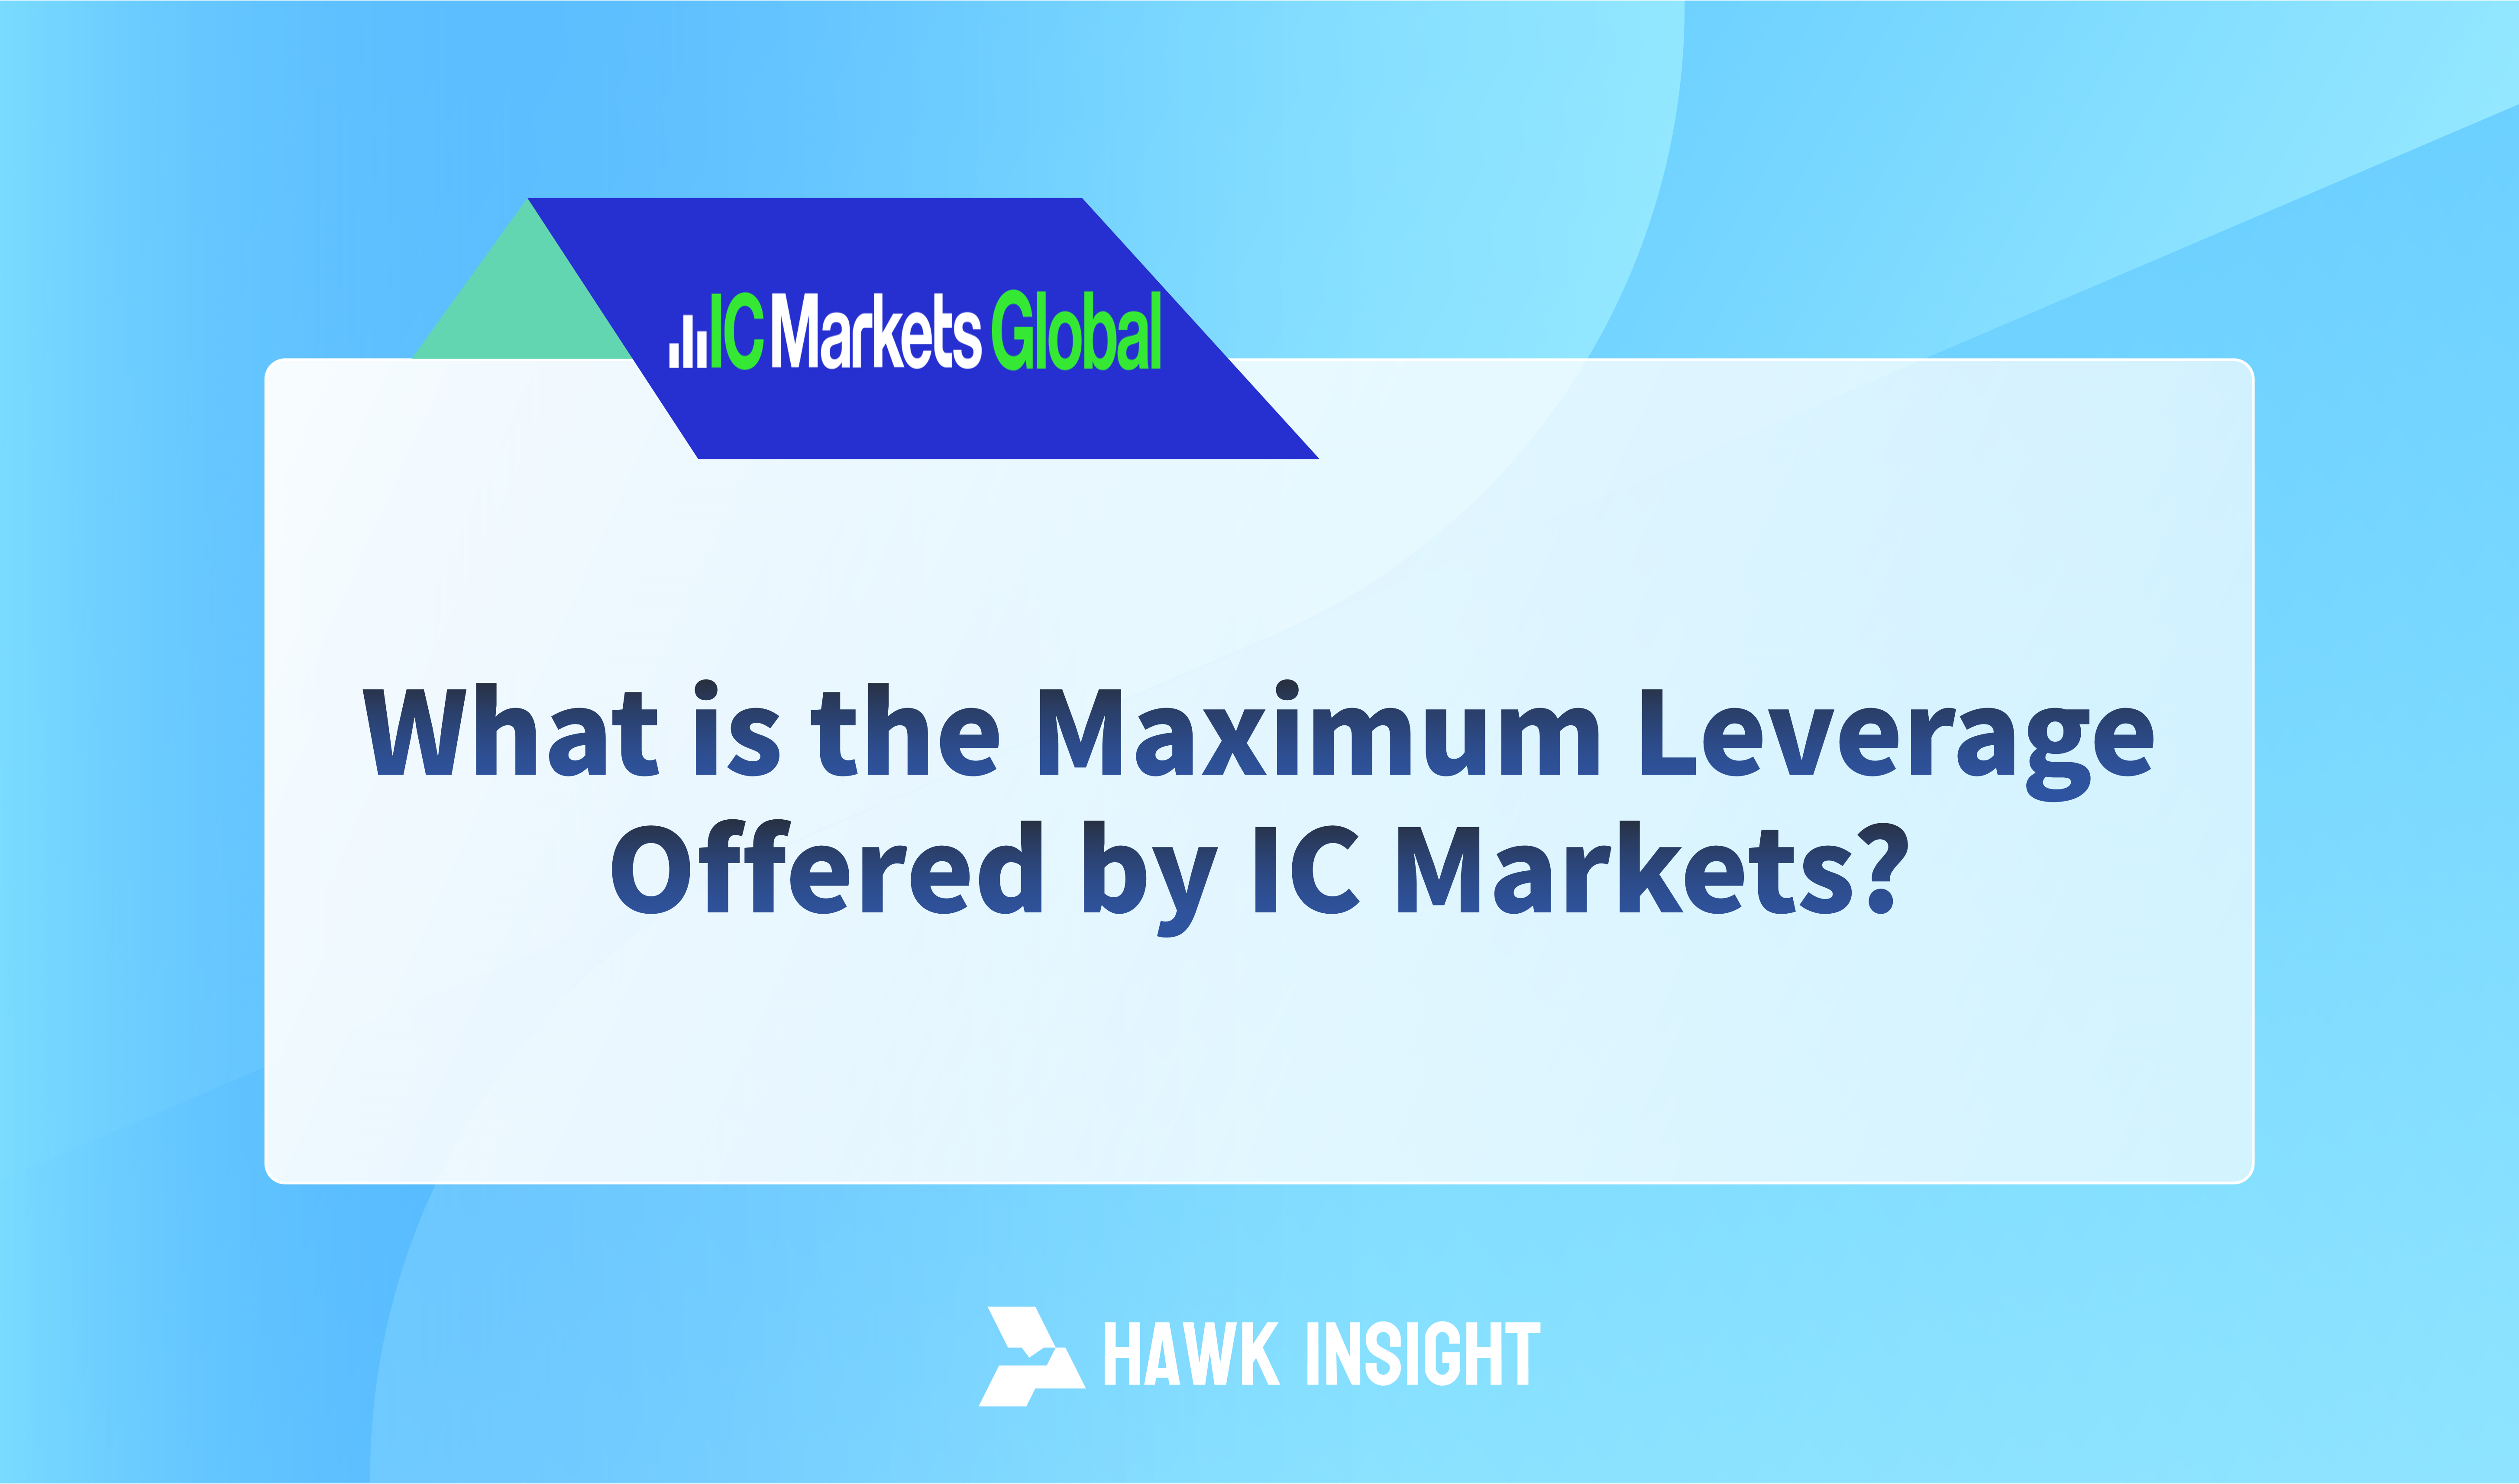 What is the Maximum Leverage Offered by IC Markets?